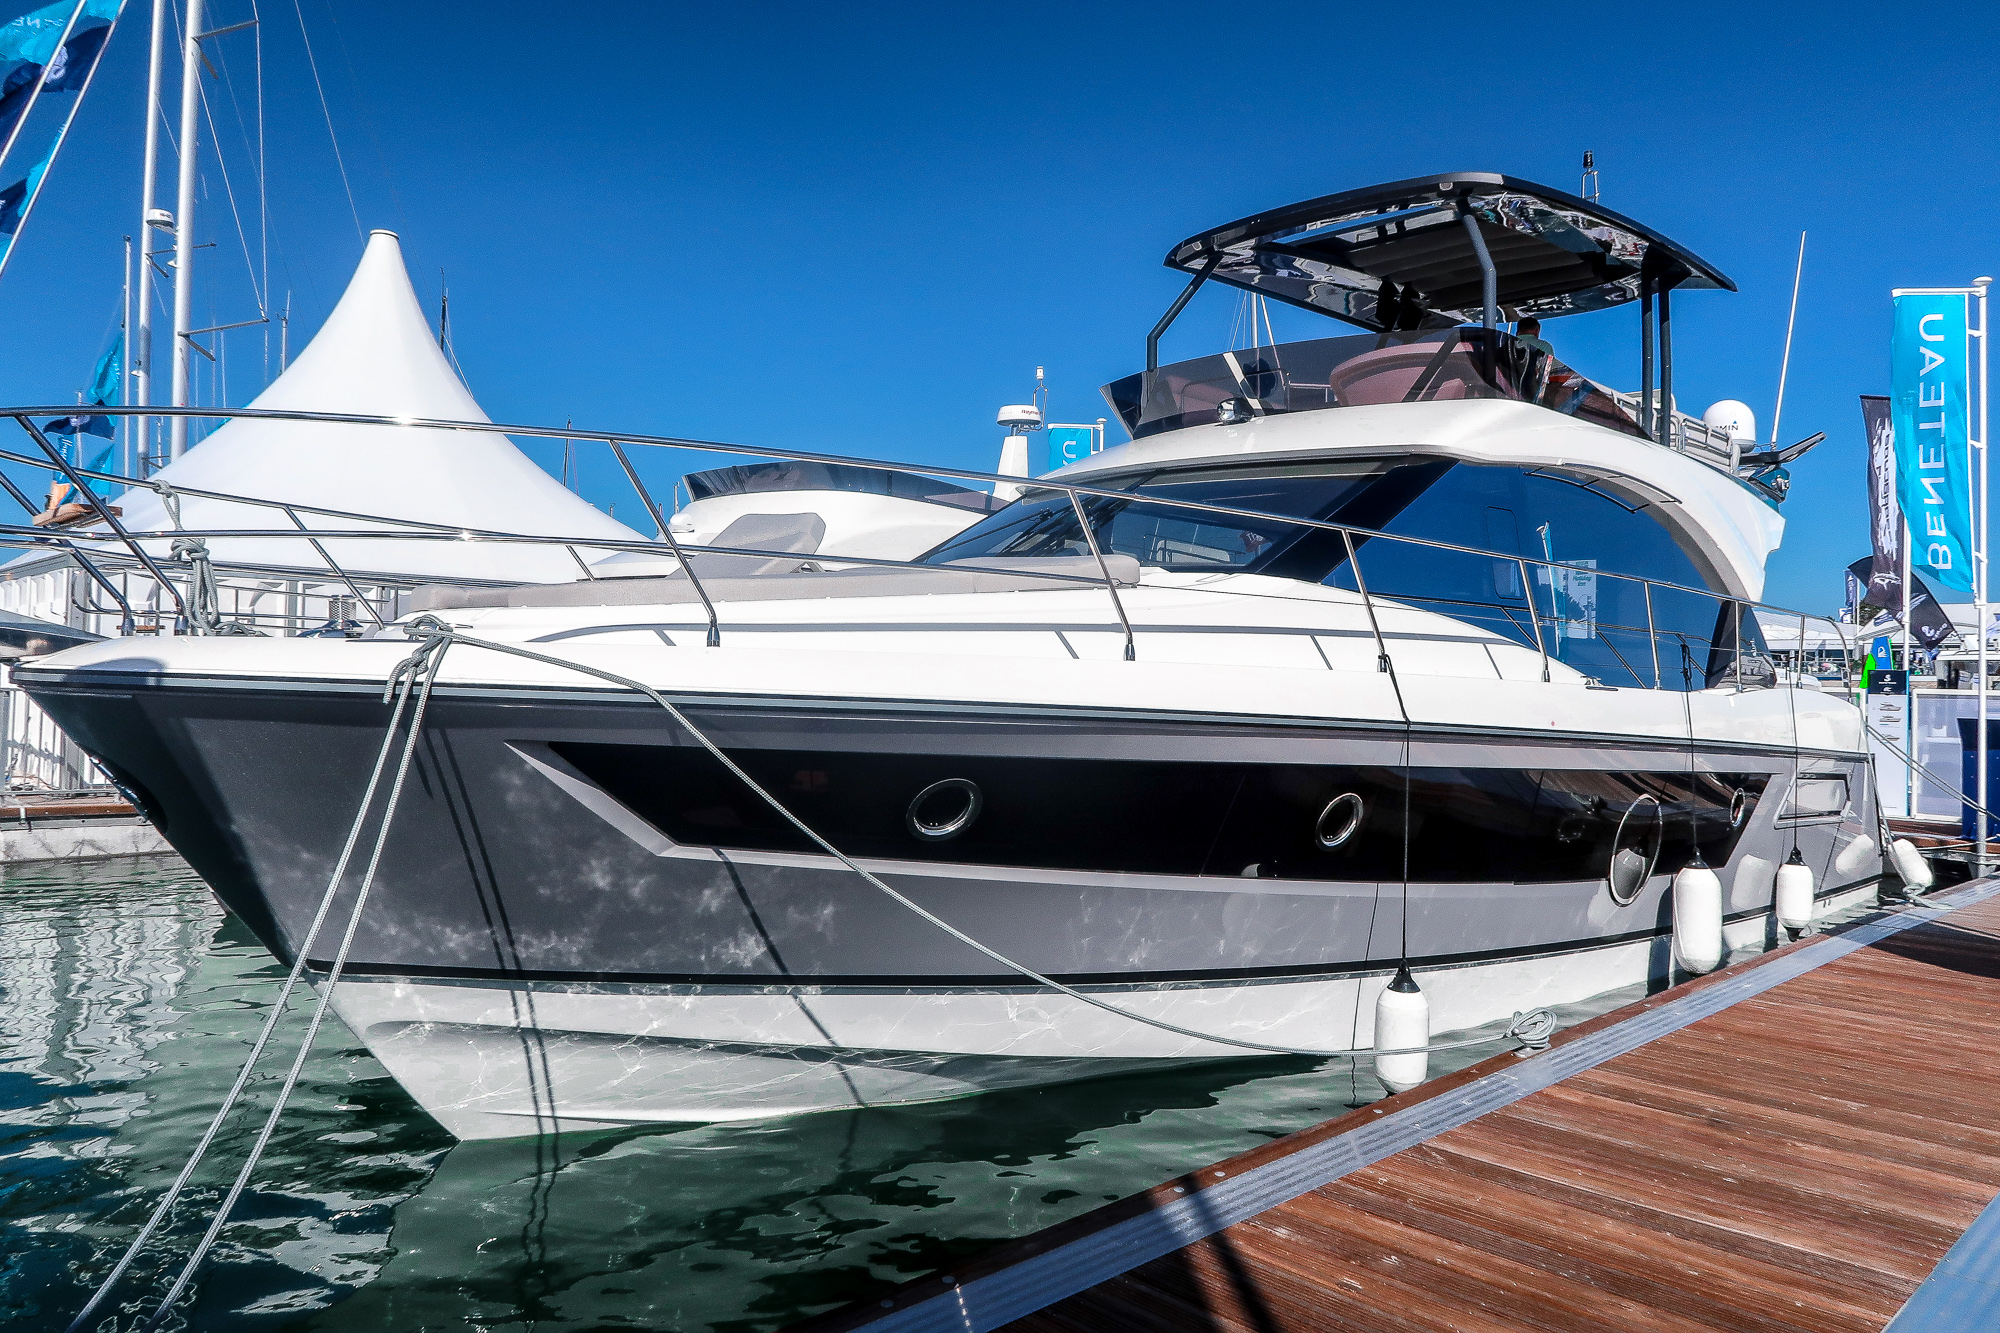 Southampton Boat Show: How To Get Discounted Tickets 25